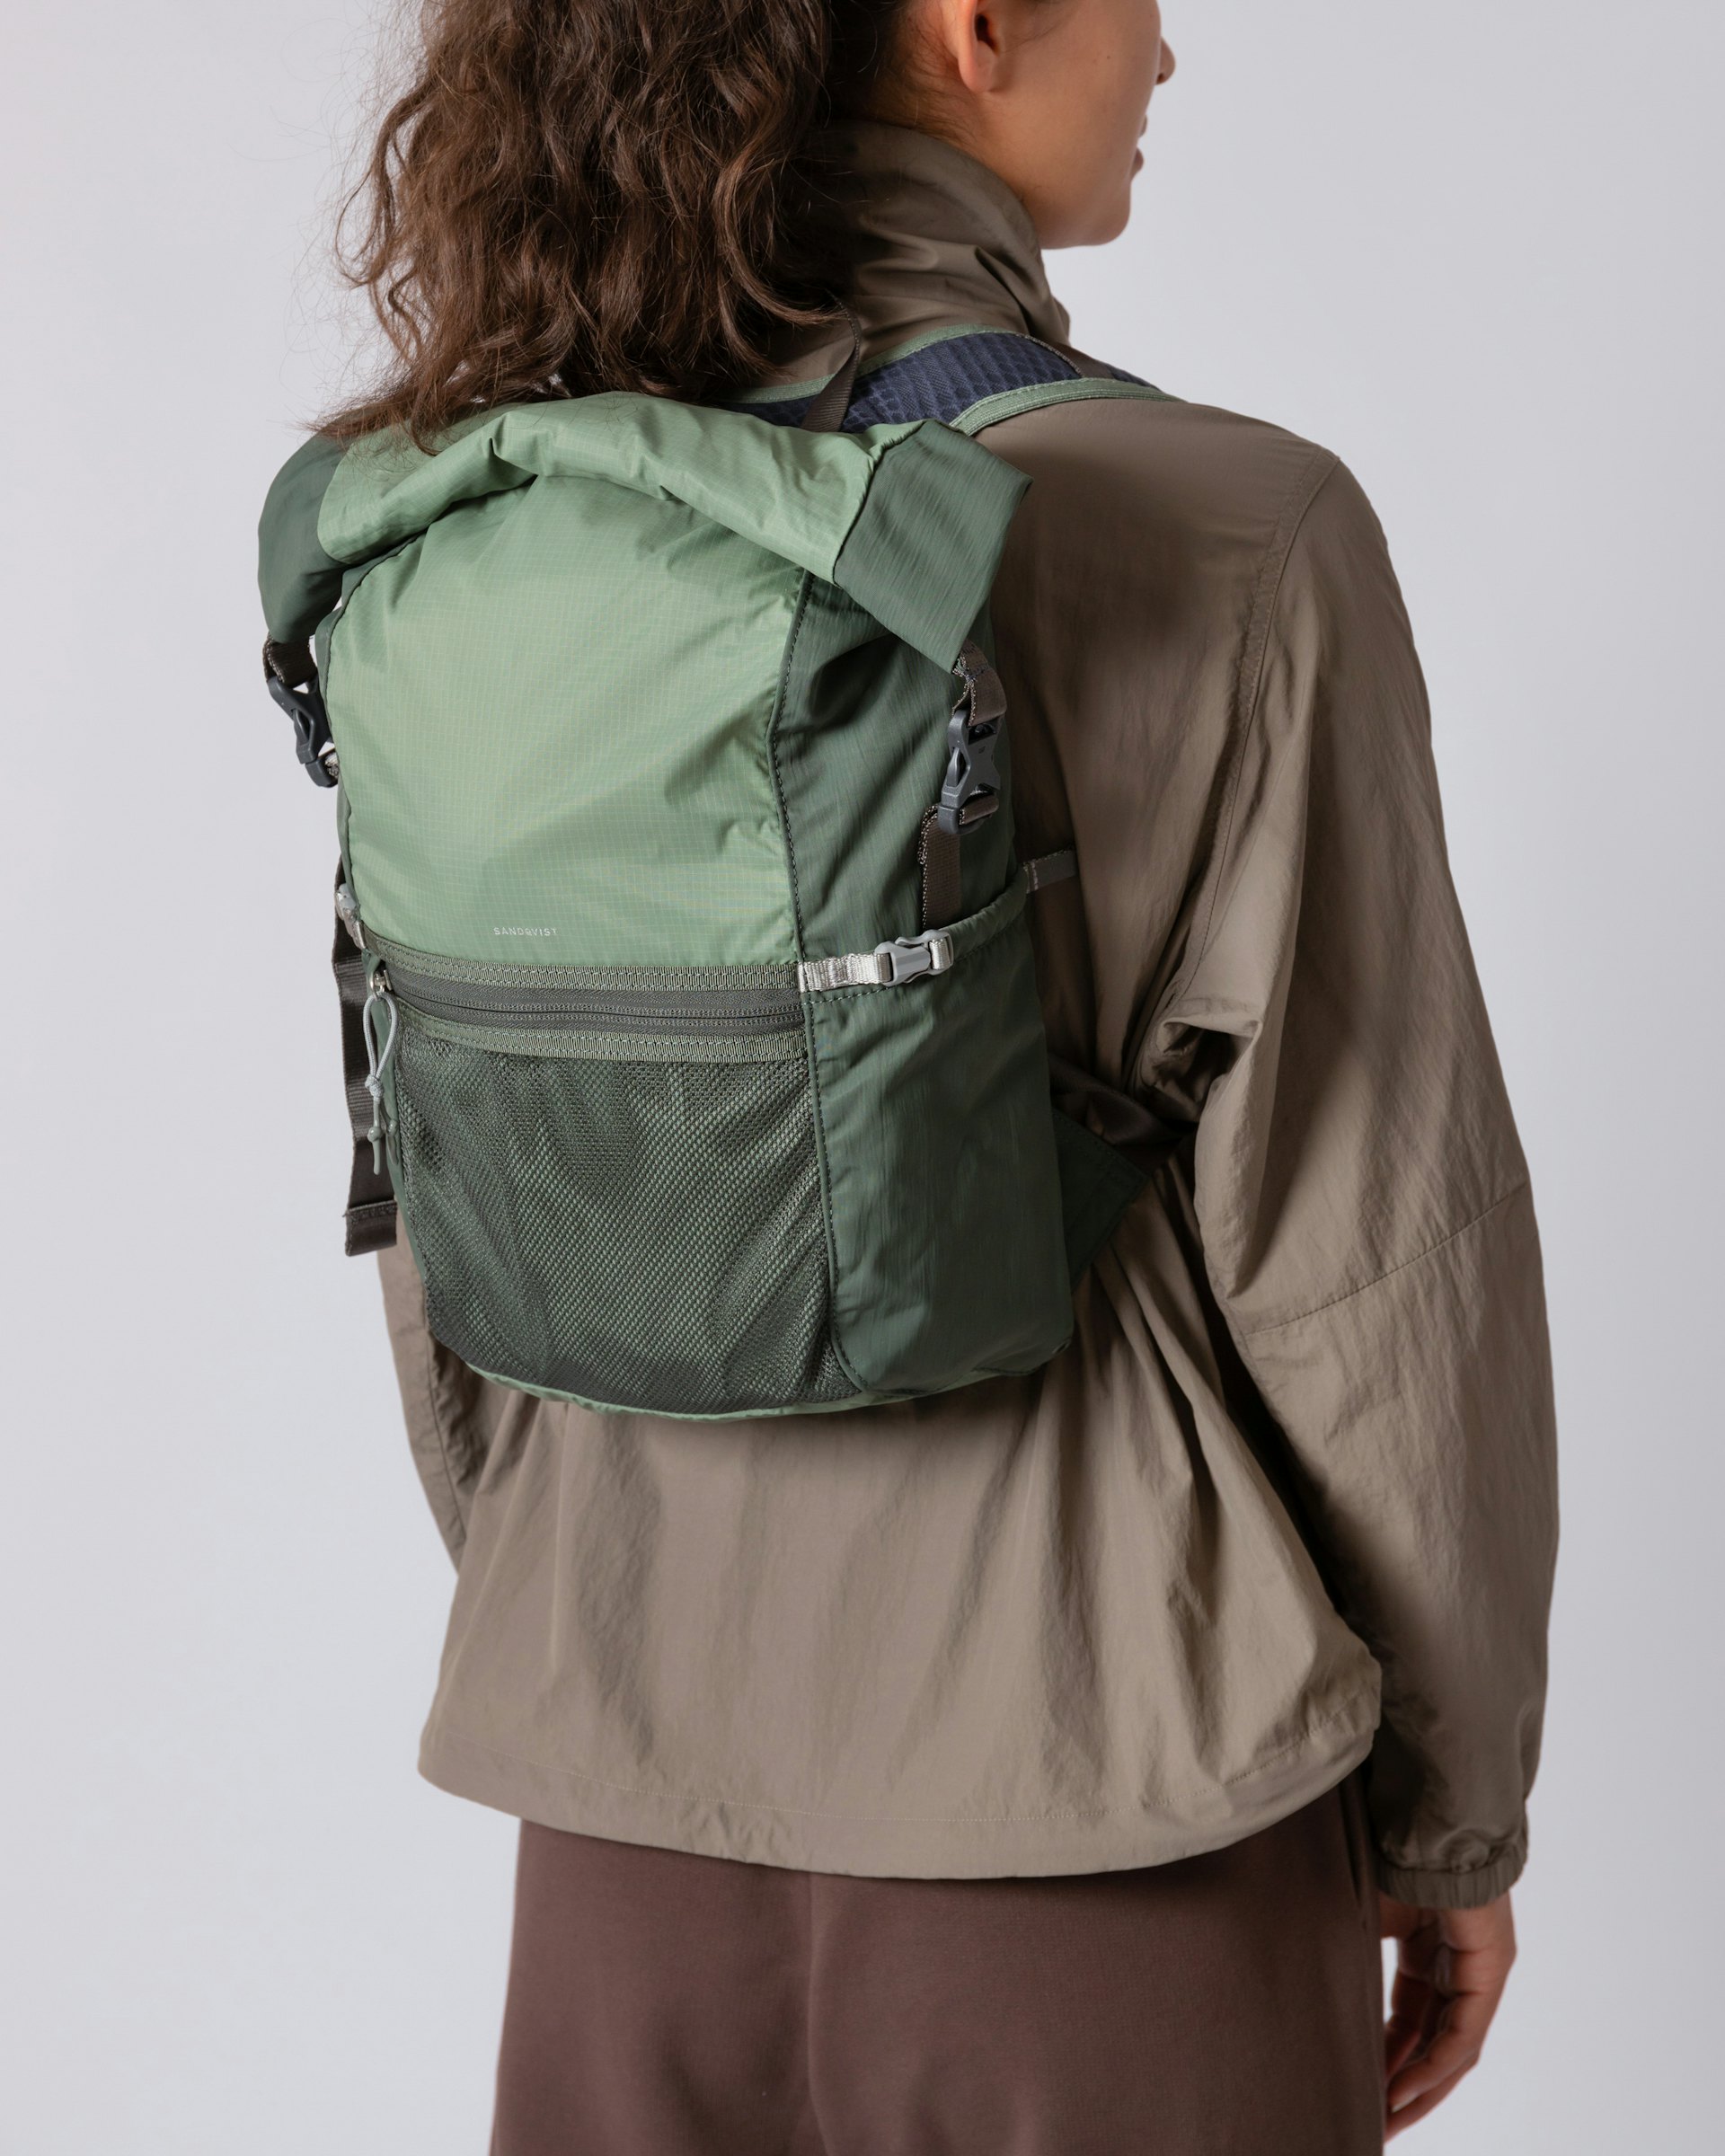 Noa belongs to the category Backpacks and is in color lichen green (7 of 7)